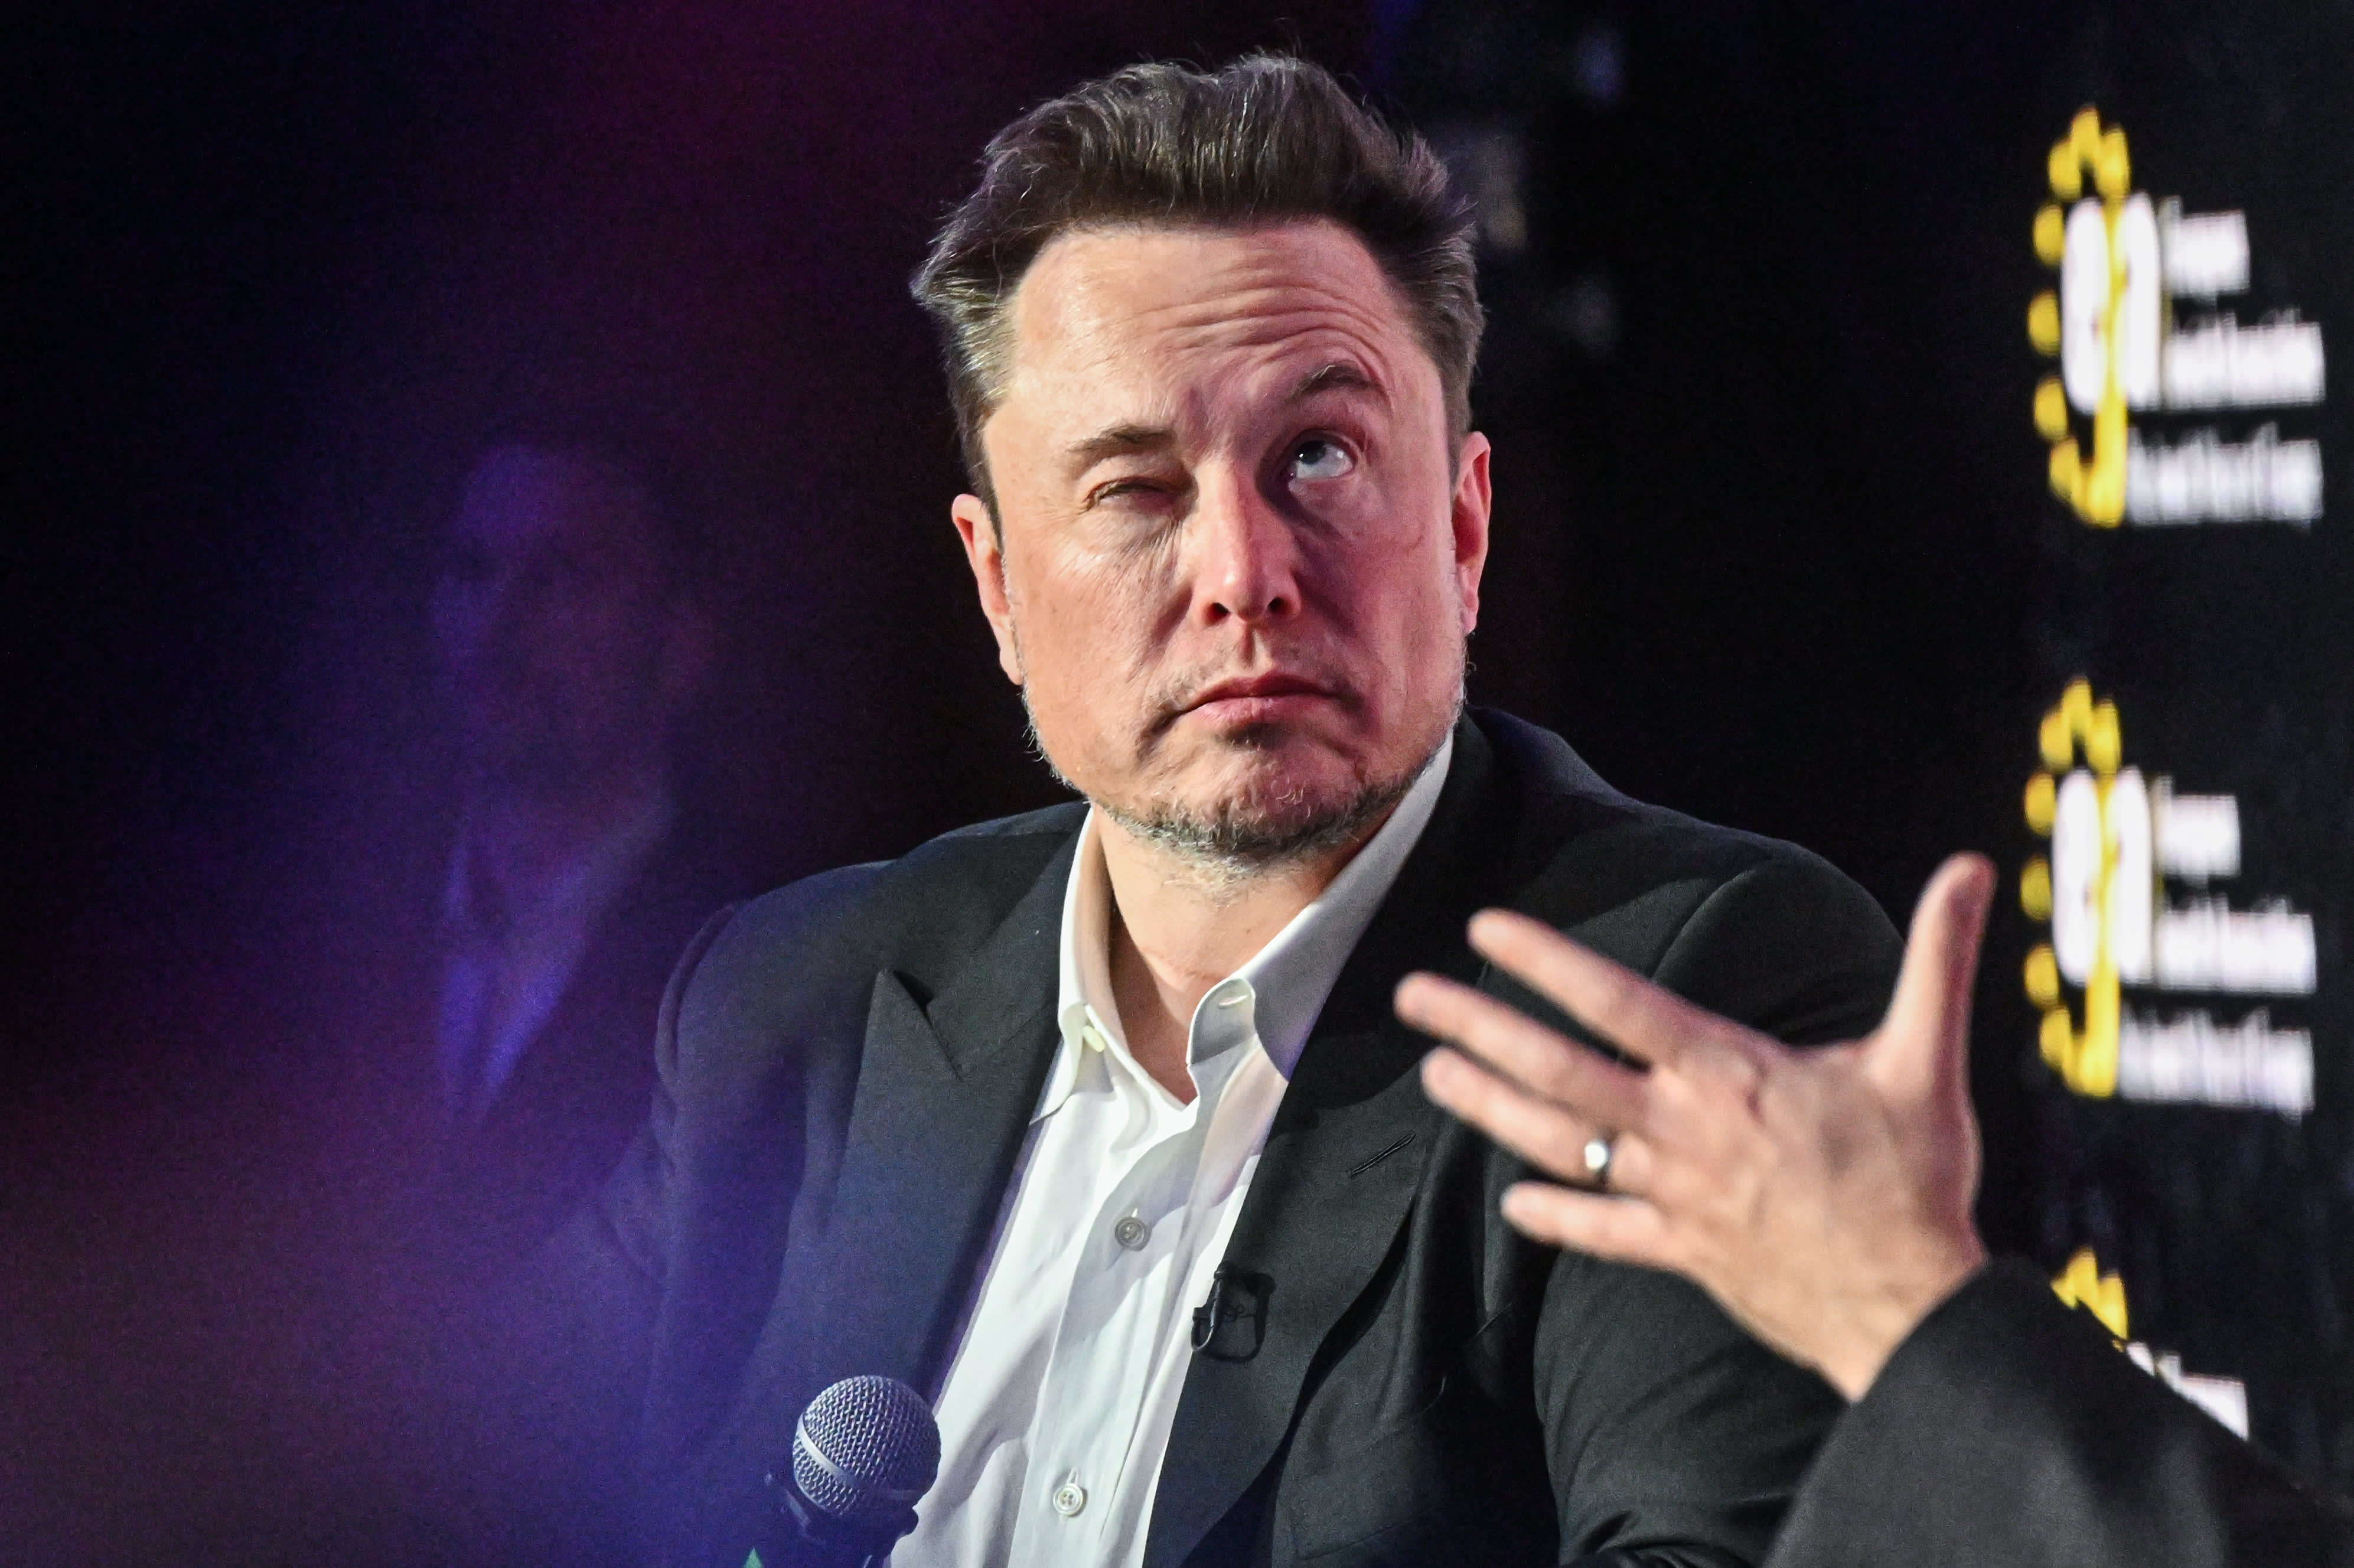 Elon Musk has been ordered to testify in the SEC's investigation into Twitter